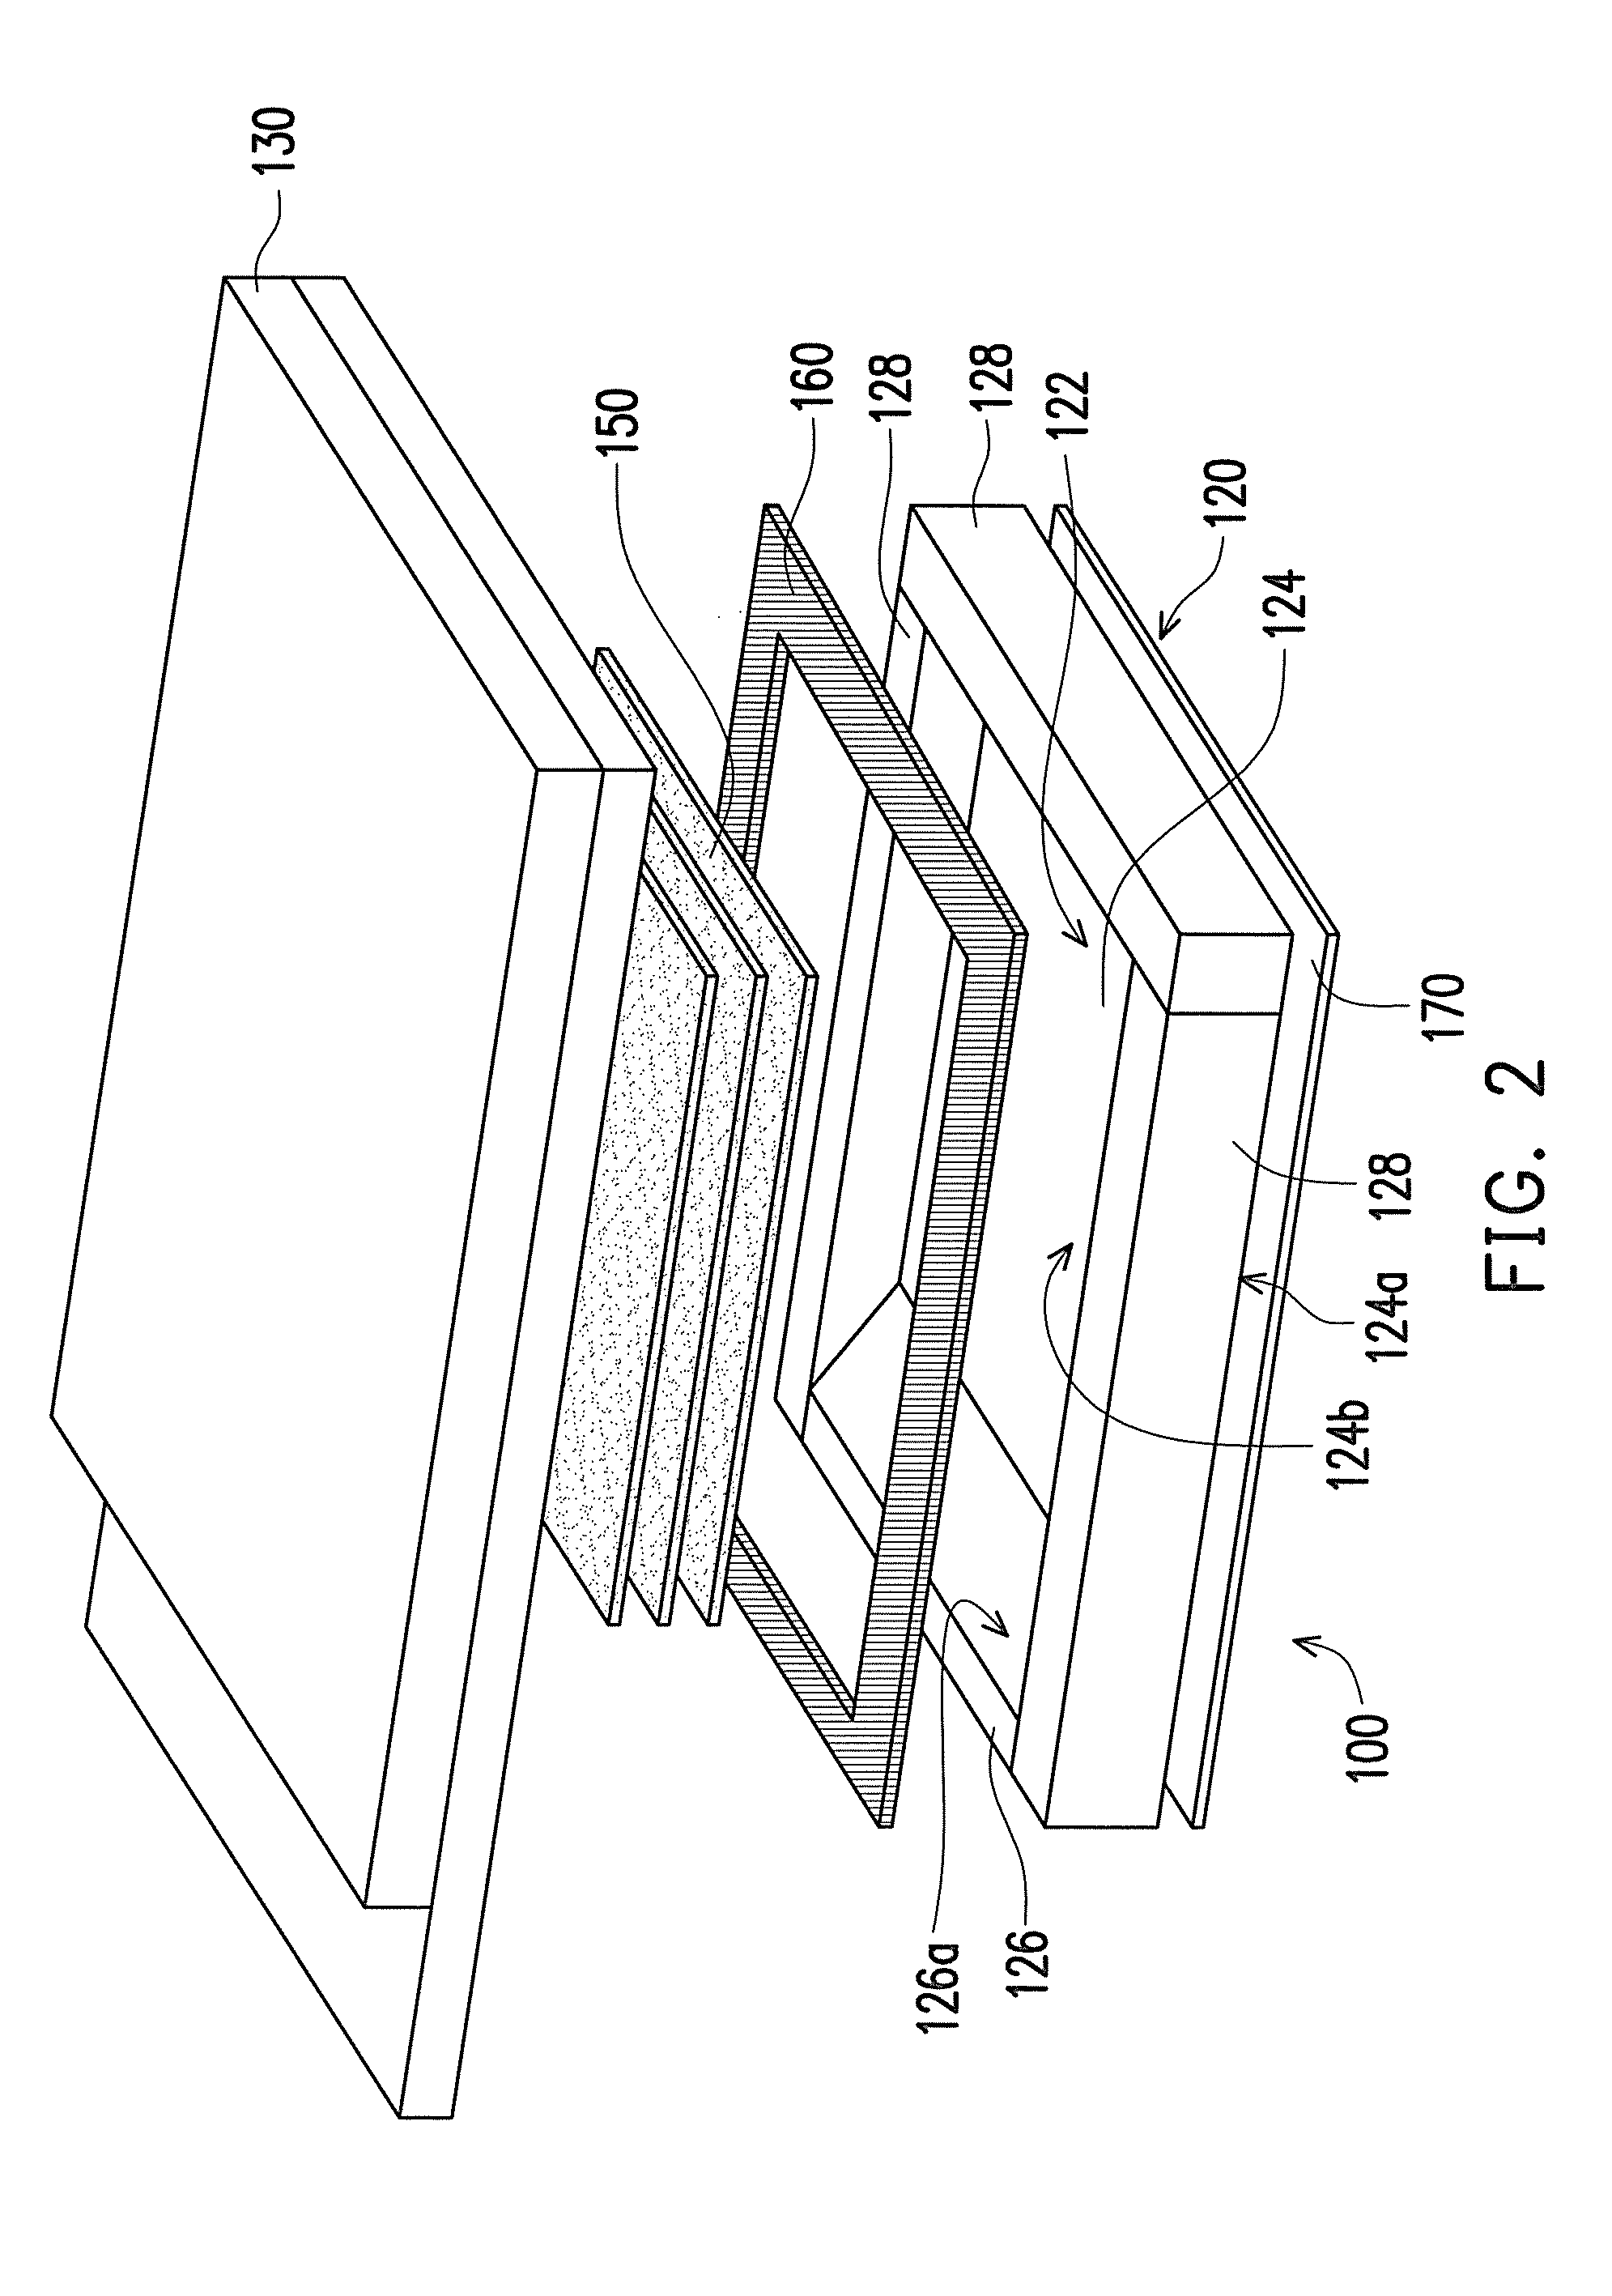 Display module and handheld electronic device